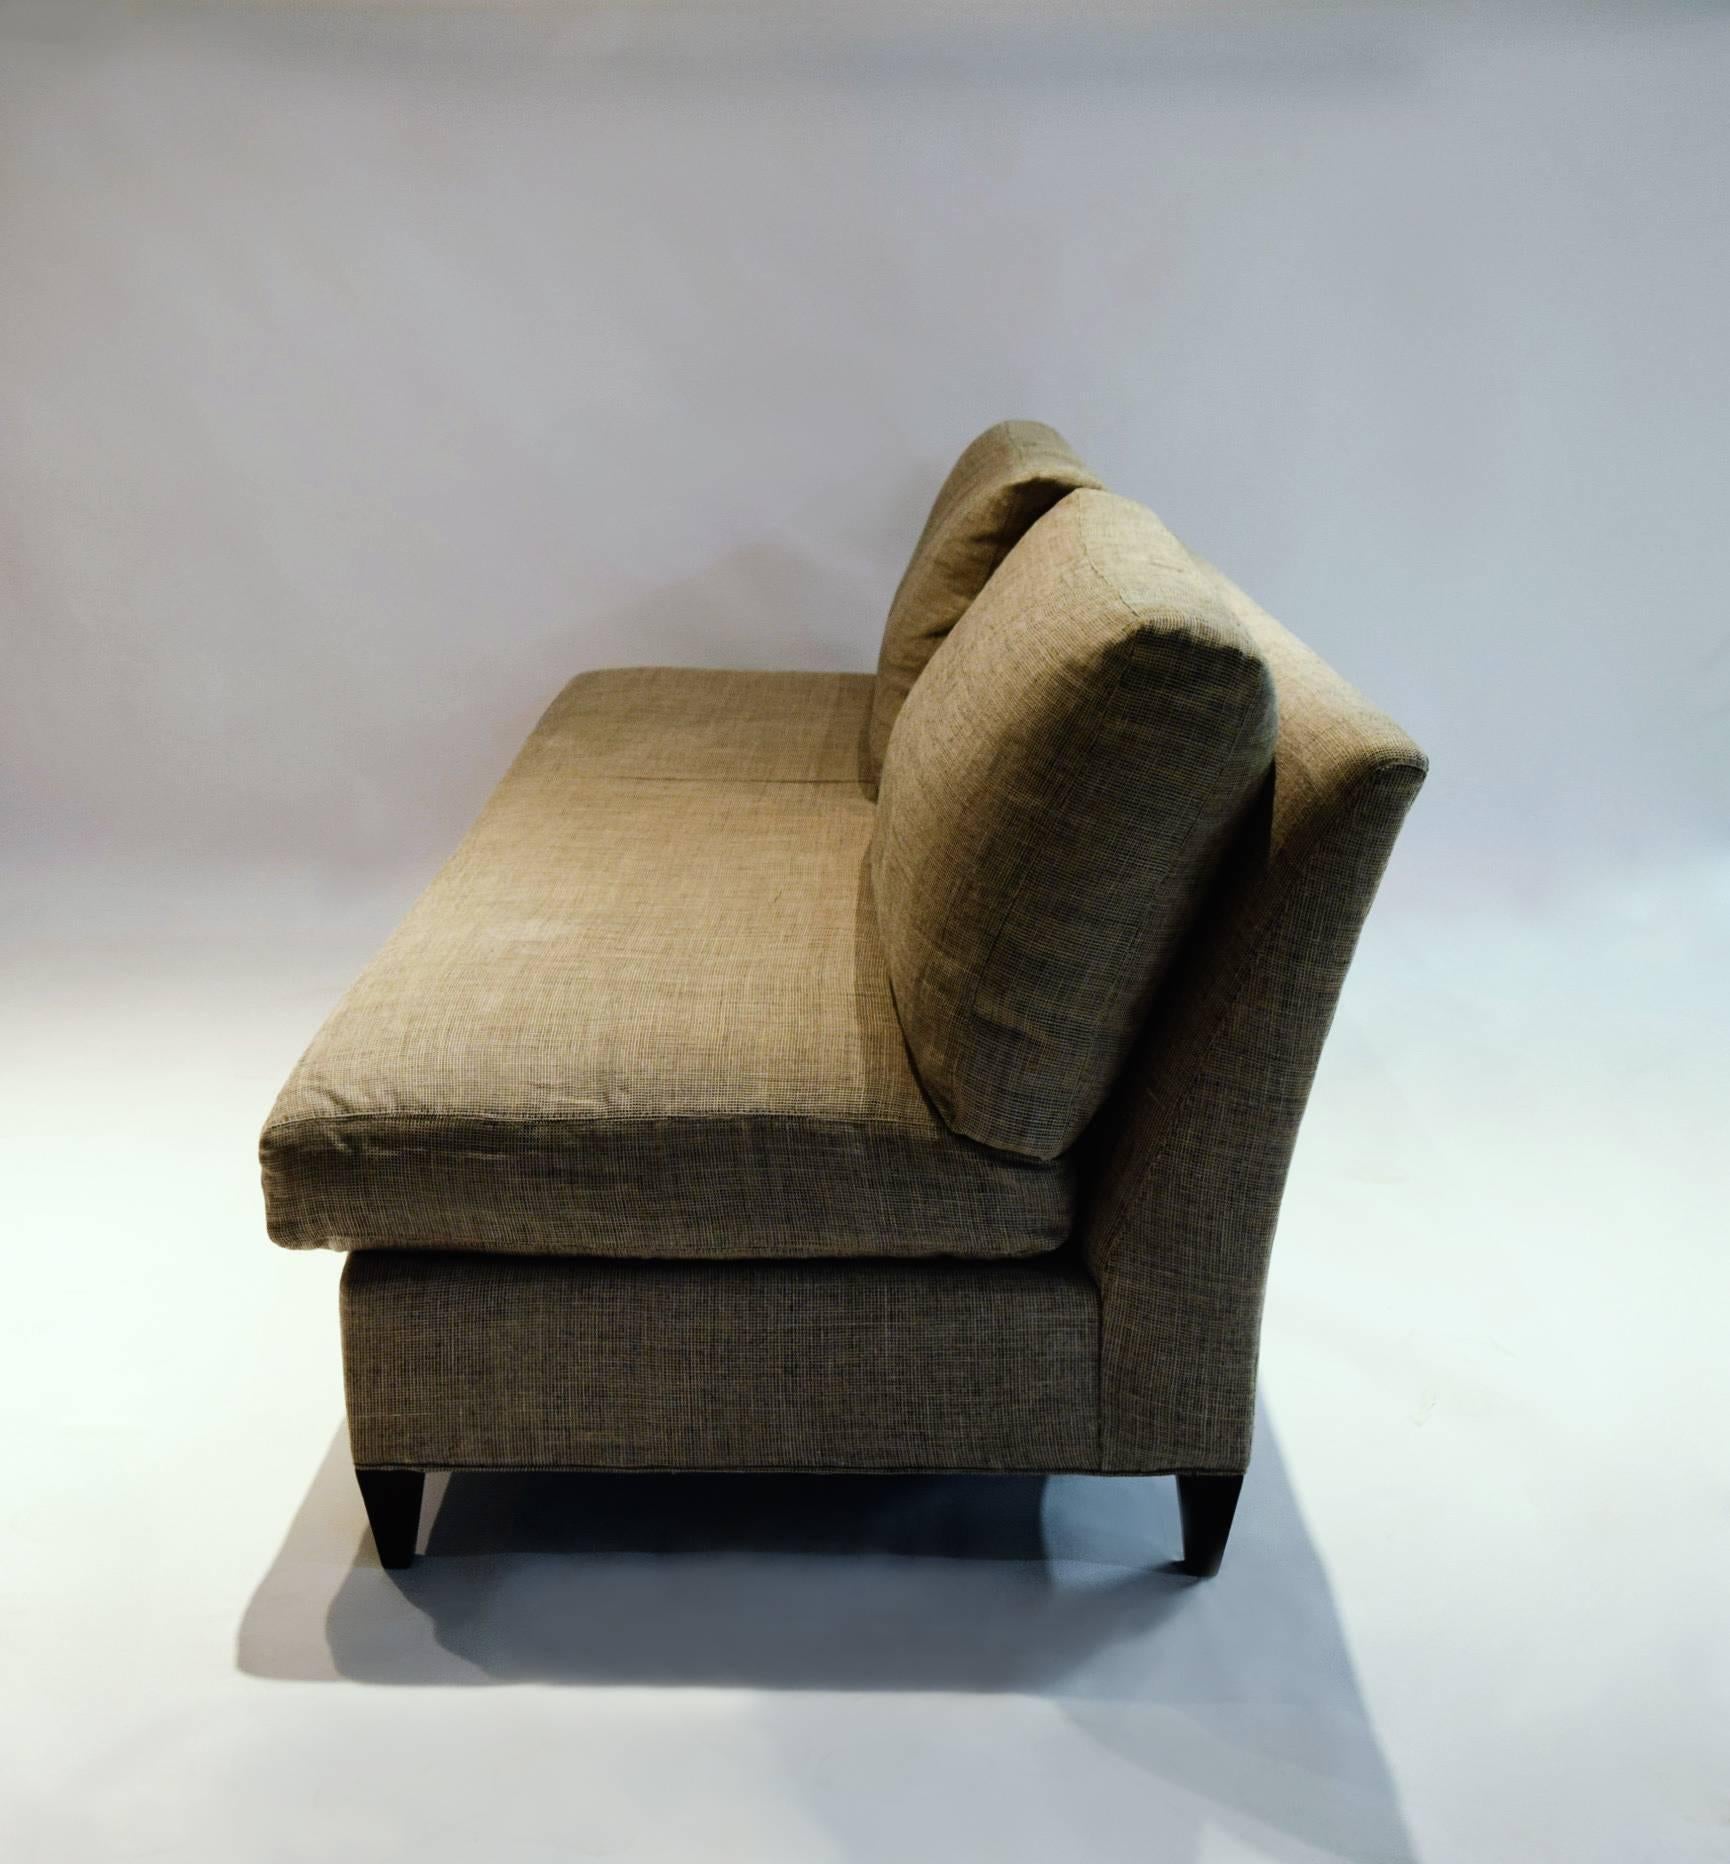 Contemporary Three-Seater Sofa Upholstered in Linen, Designed by Suzanne Kasler 2006